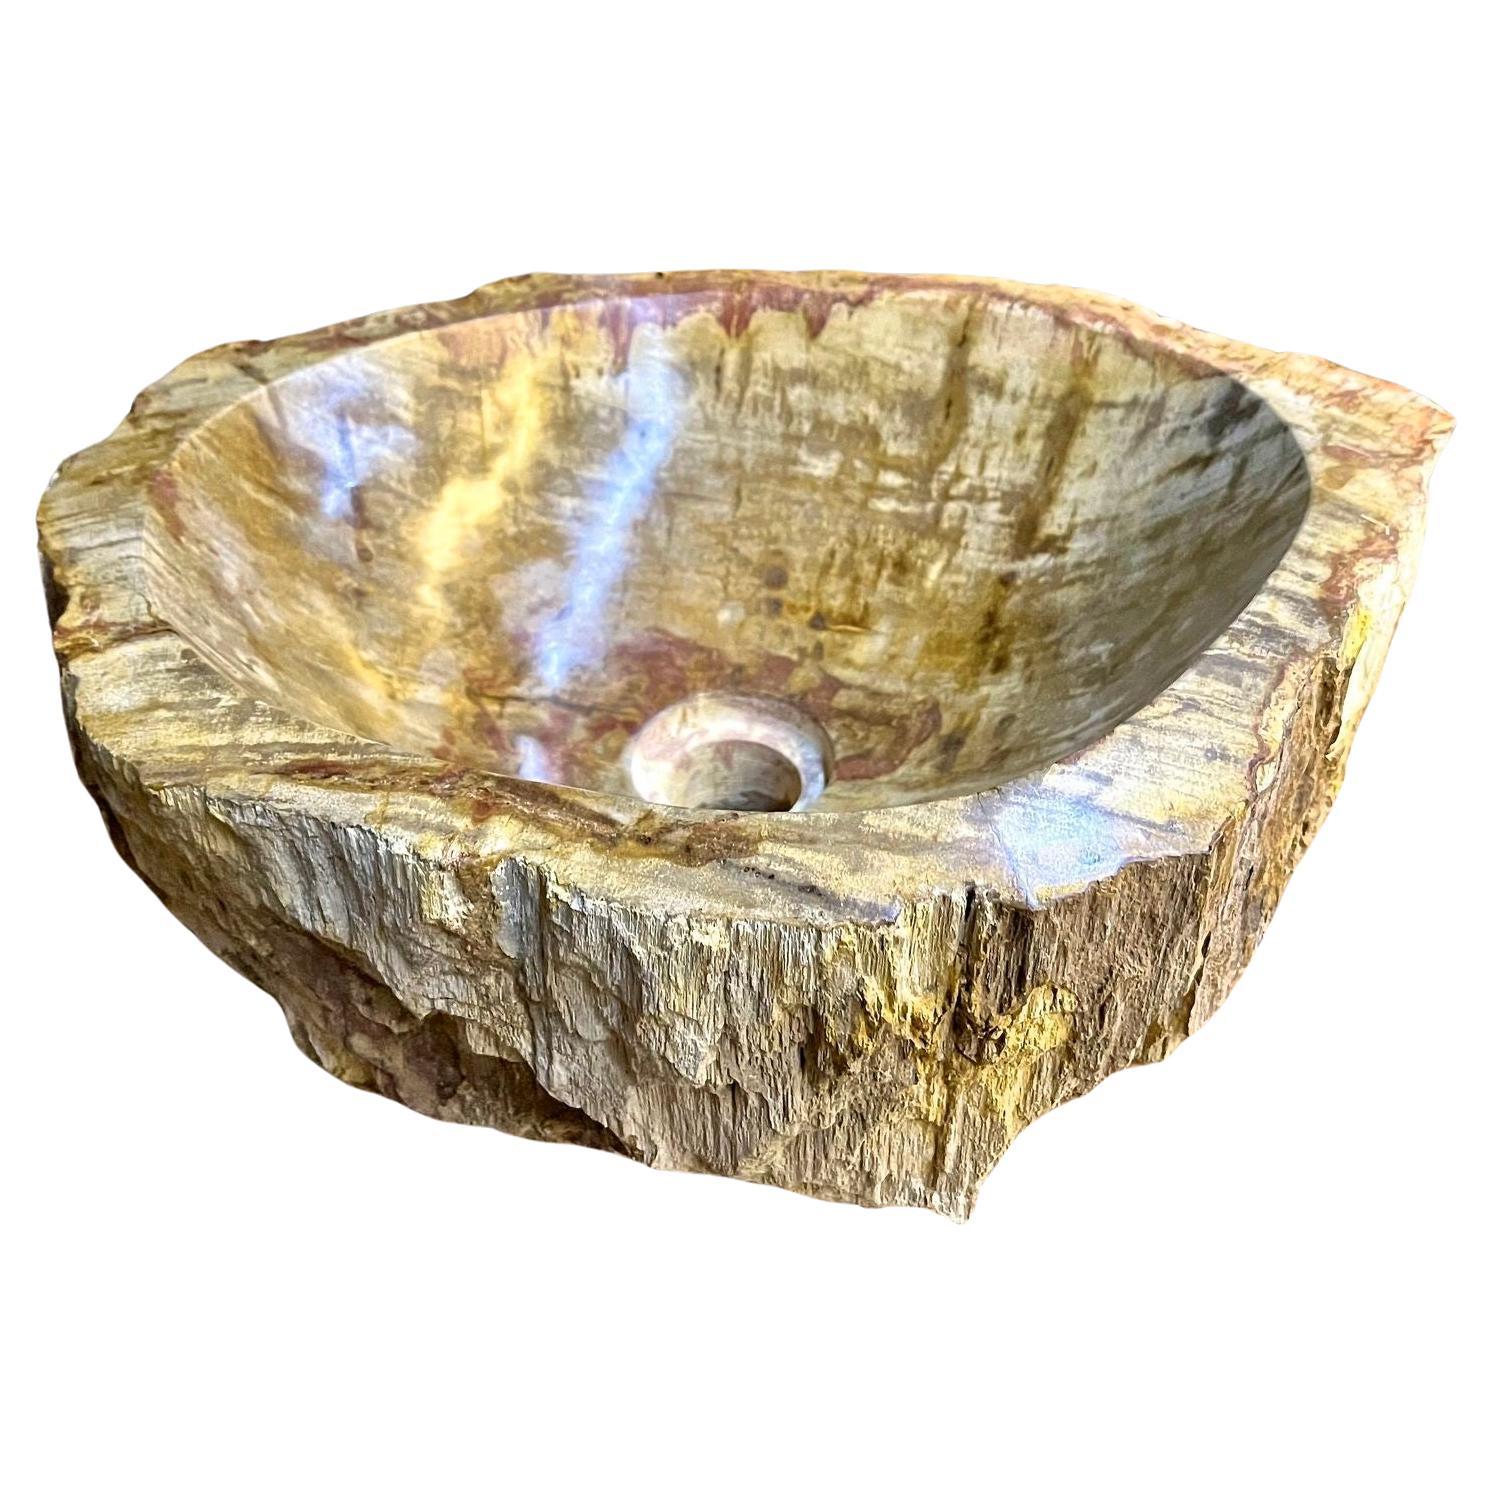 Petrified Wood Sink In Beige/ Brown/ Yellow Tones - Polished, Top Quality, IDN For Sale